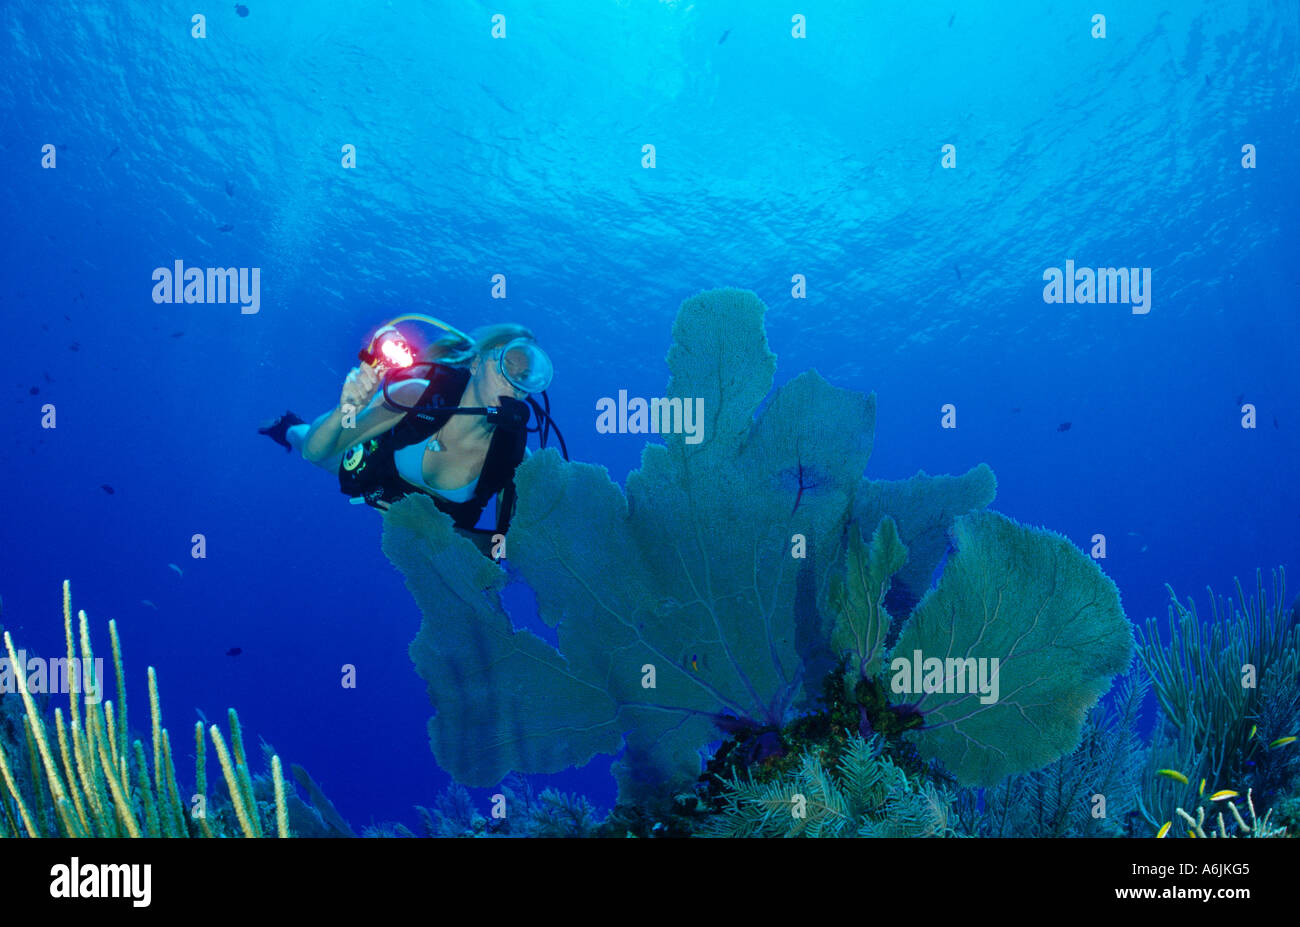 scuba diver on colorful Caribbean coral reef Stock Photo